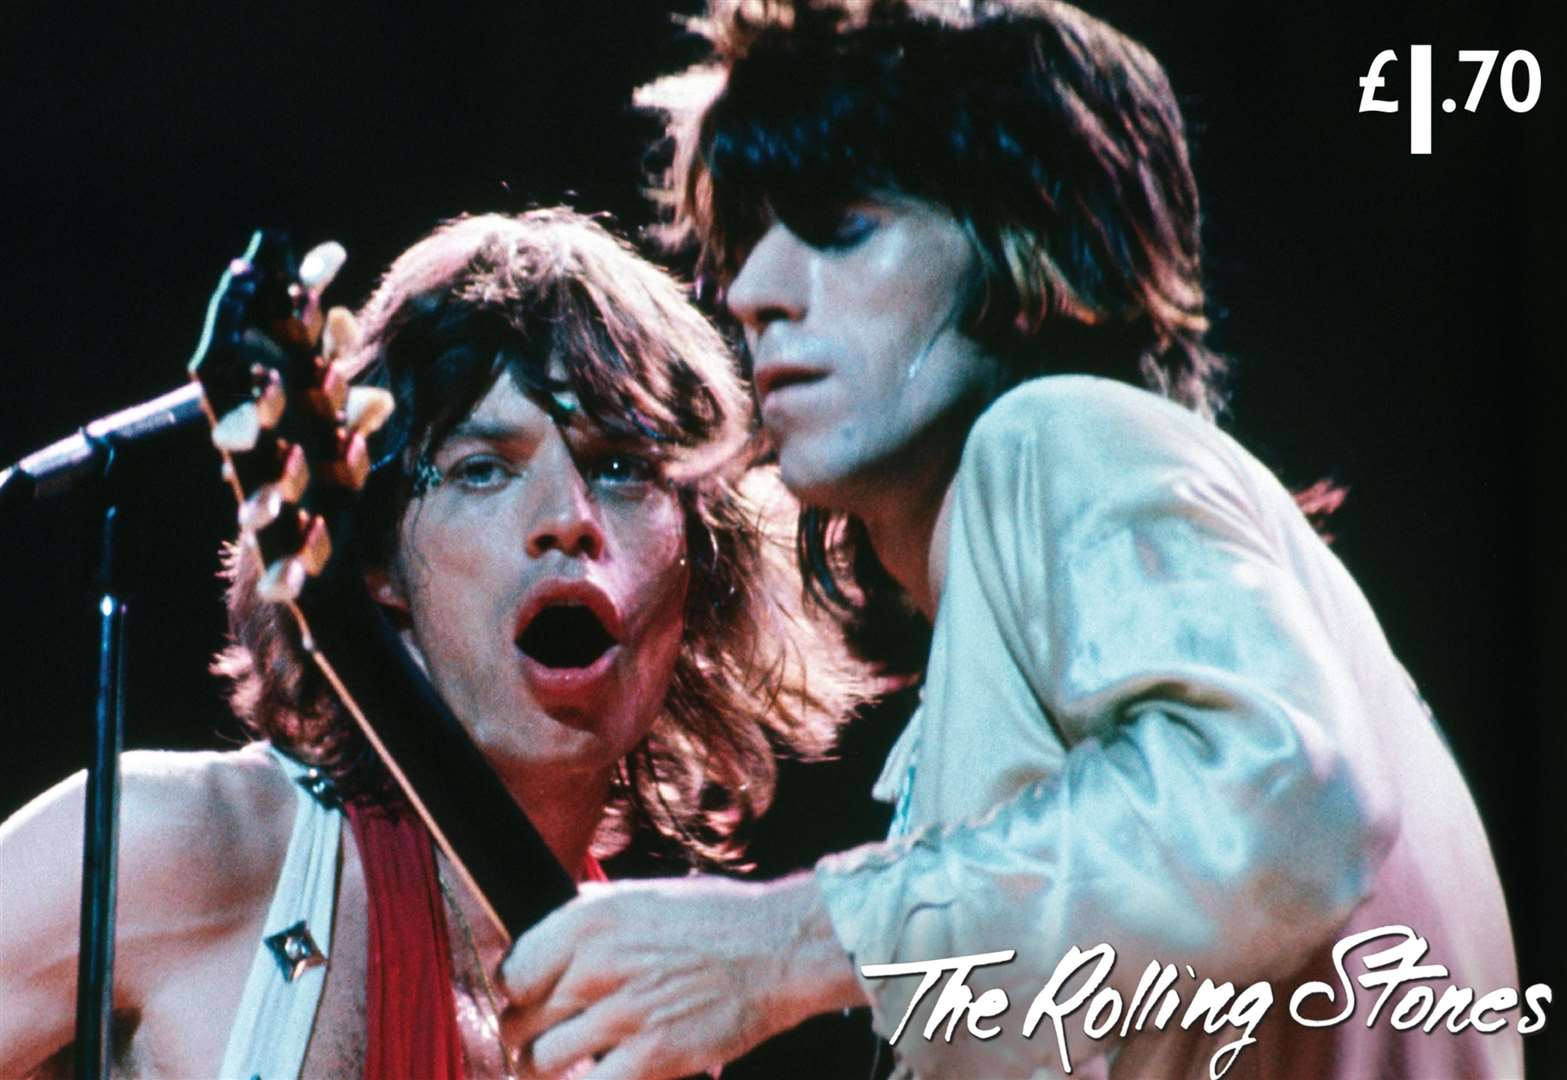 Sixty years of The Rolling Stones depicted in 12 new stamps